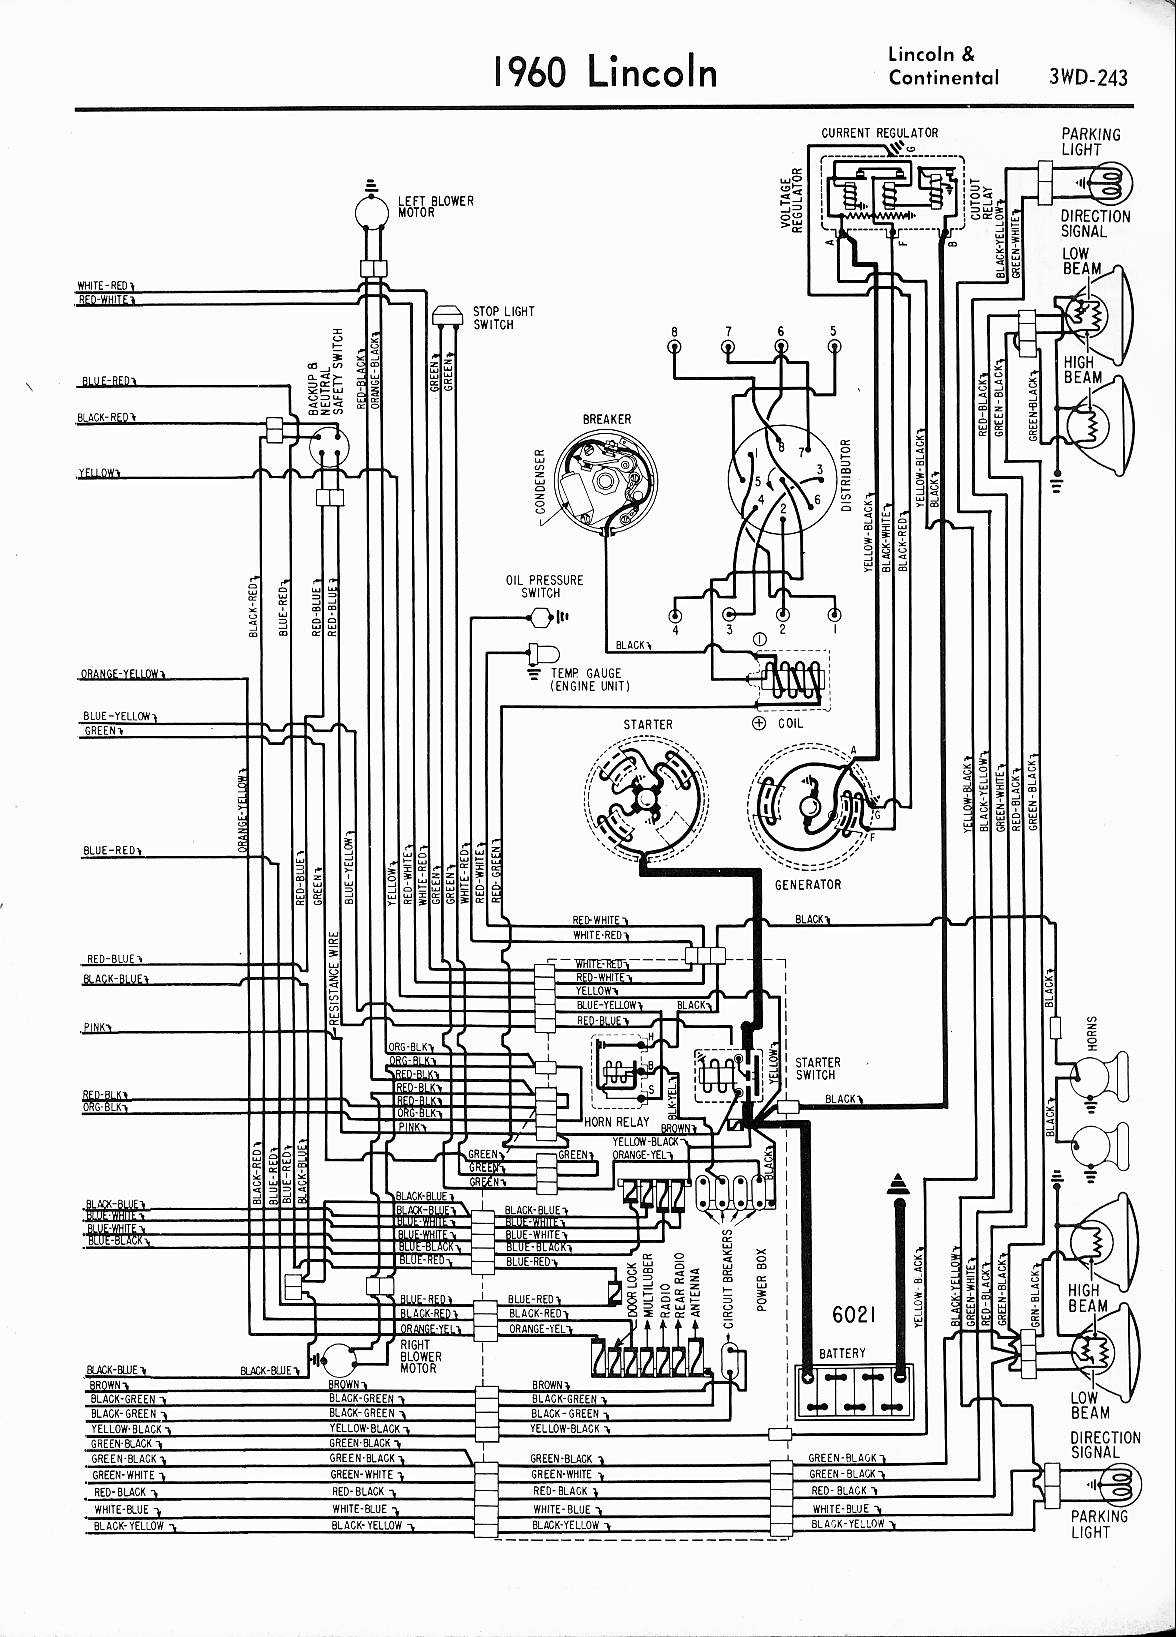 Lincoln Wiring Diagram Pdf from www.oldcarmanualproject.com